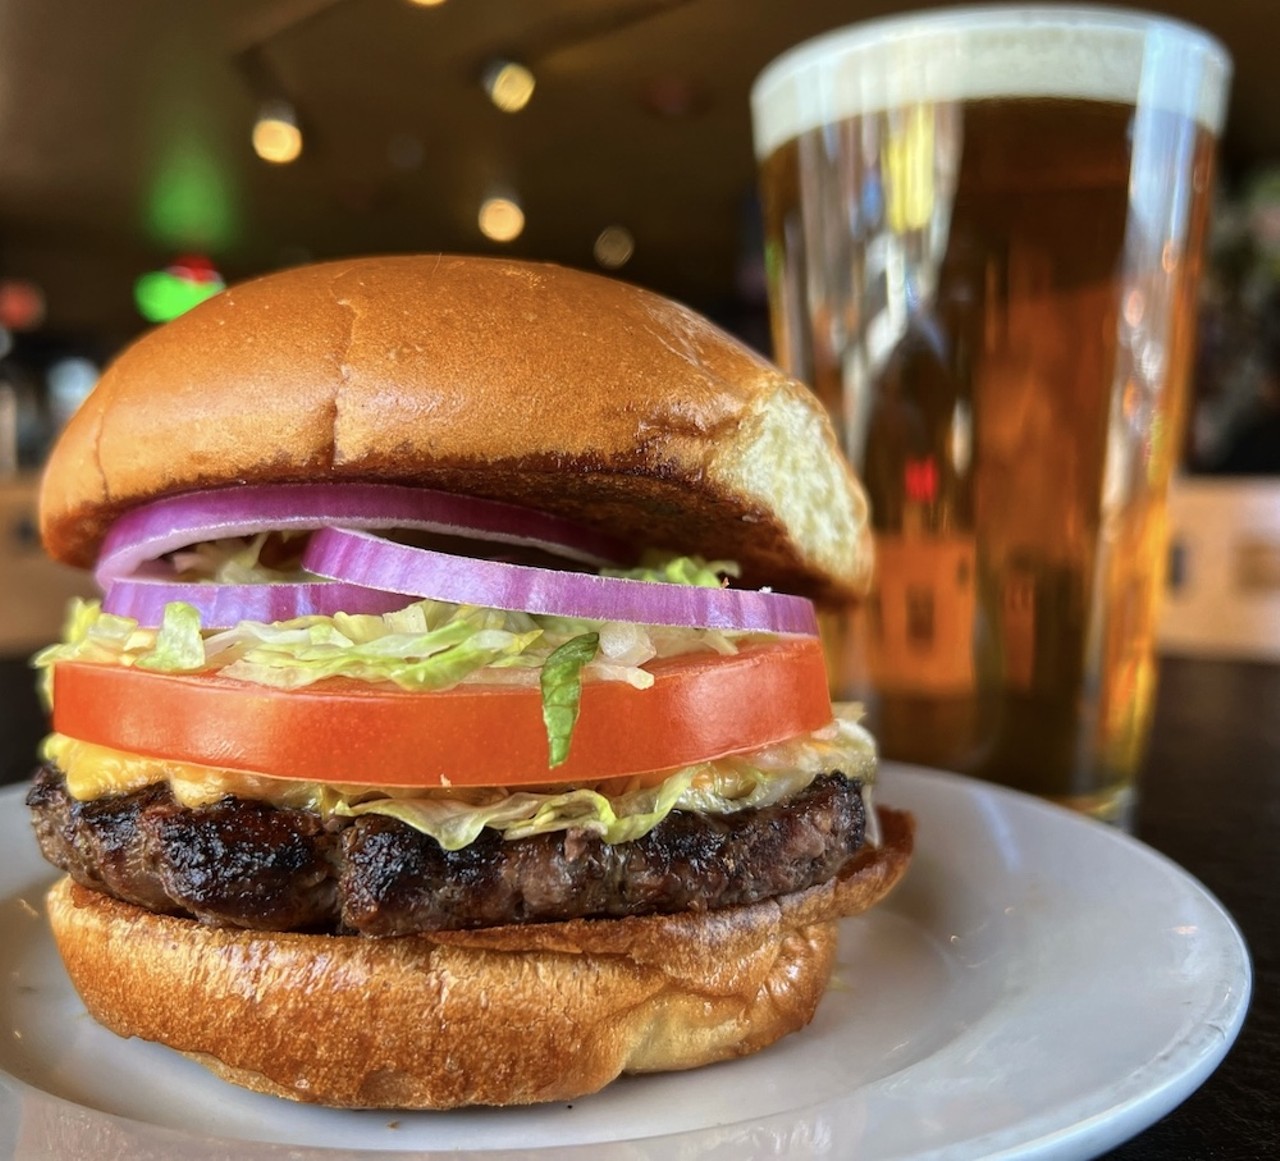  Buckeye Beer Engine
15315 Madison Ave., Lakewood 
Buckeye Beer Engine is offering their signature third-pound, chargrilled Ohio beef patty topped with melted American cheese, lettuce, tomato, and red onion. House-made black bean patty substitute (vegetarian).